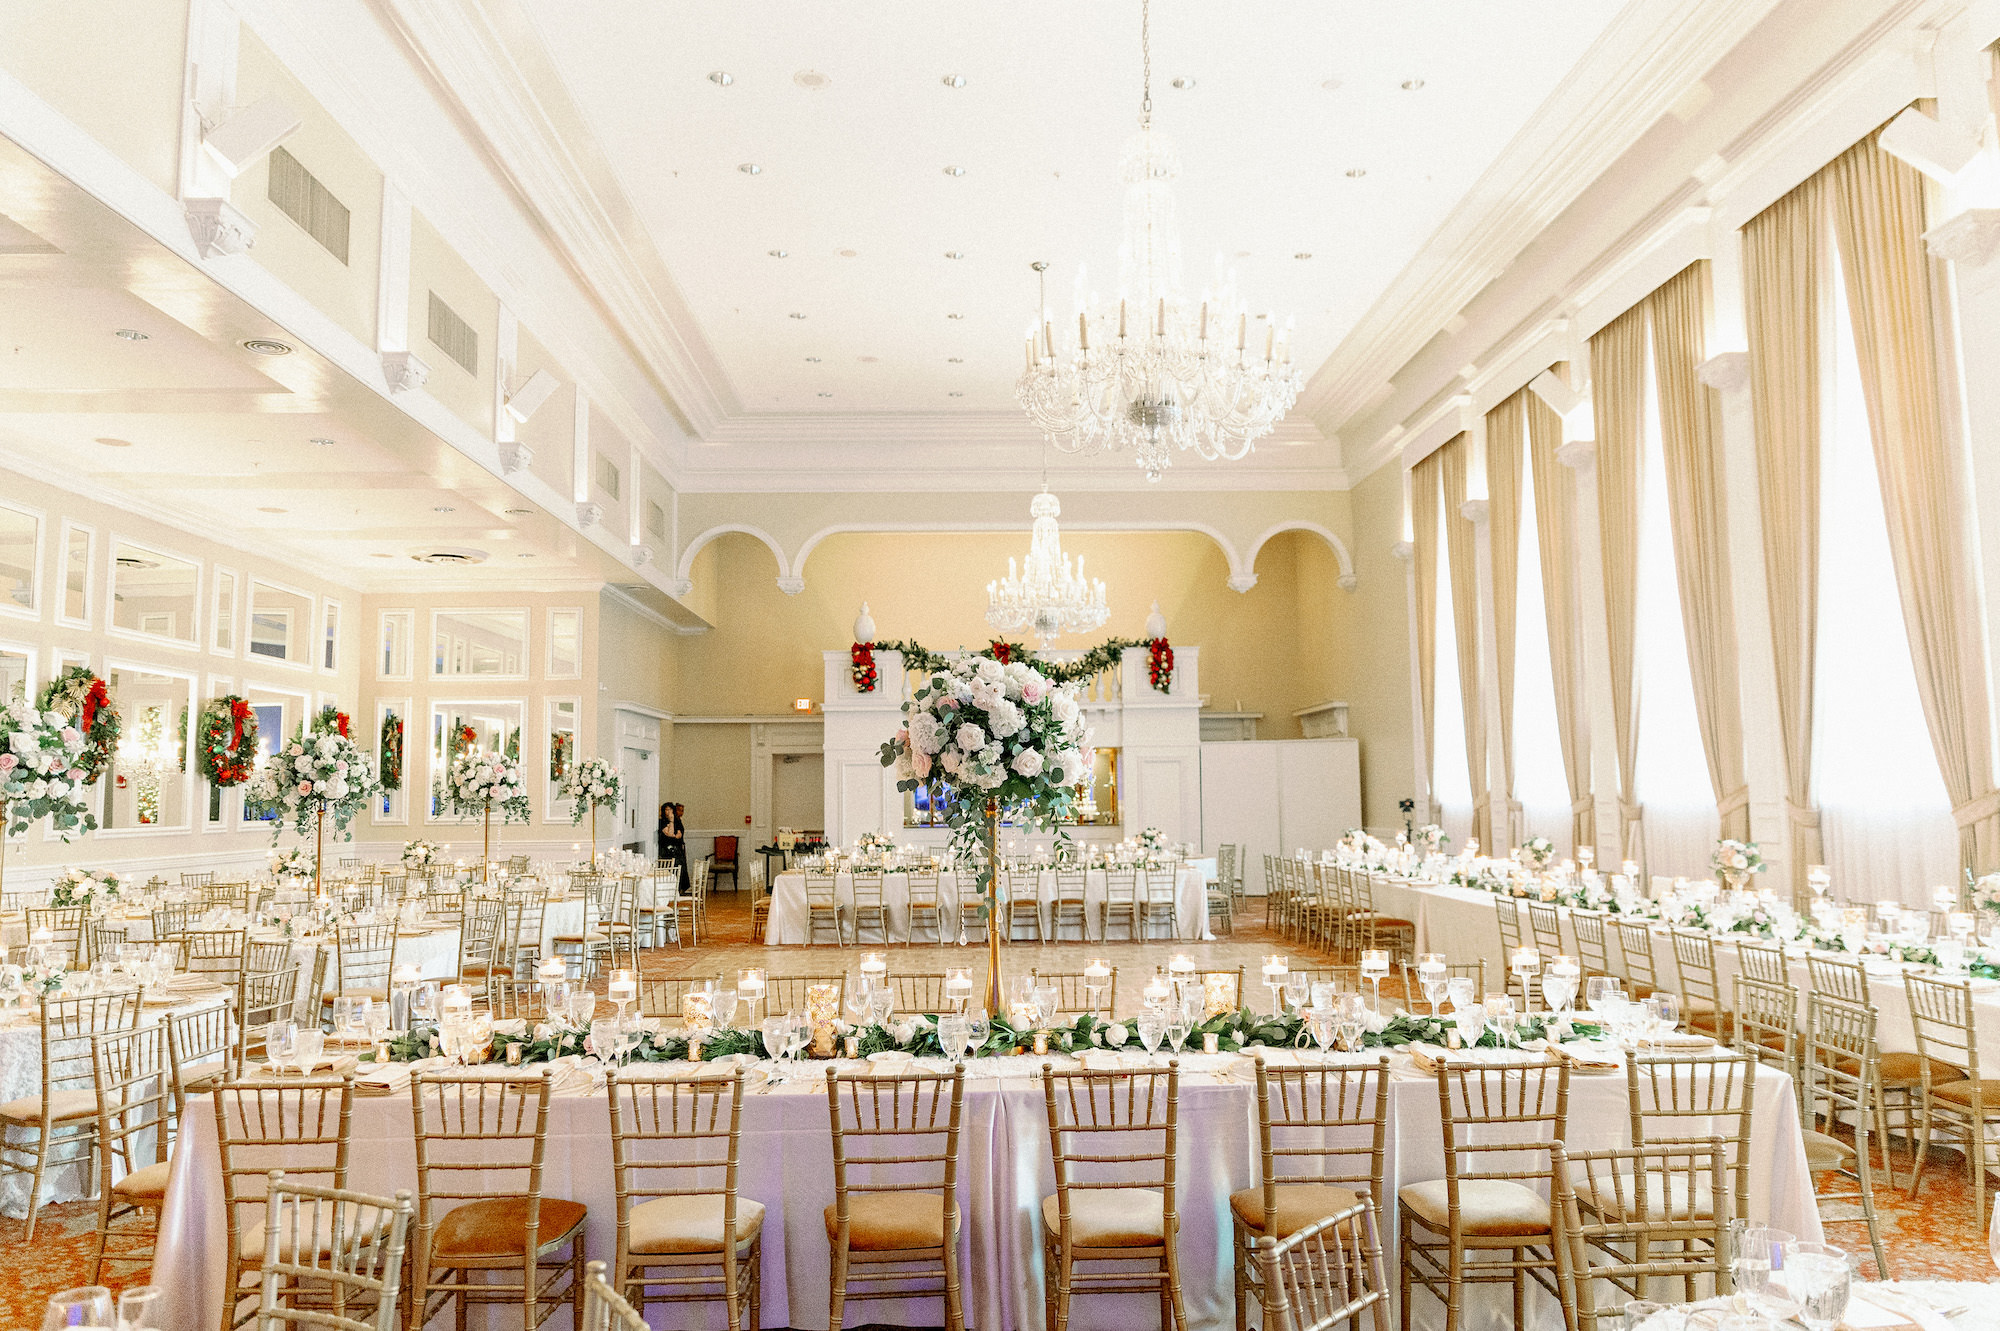 Timeless Gold Wedding Reception Ideas | Gold Chiavari Chairs | Tall Crystal Centerpieces | Tampa Bay Florist Monarch Events and Design | Kate Ryan Event Rentals | Venue Palma Ceia Country Club | Over The Top Rental Linens